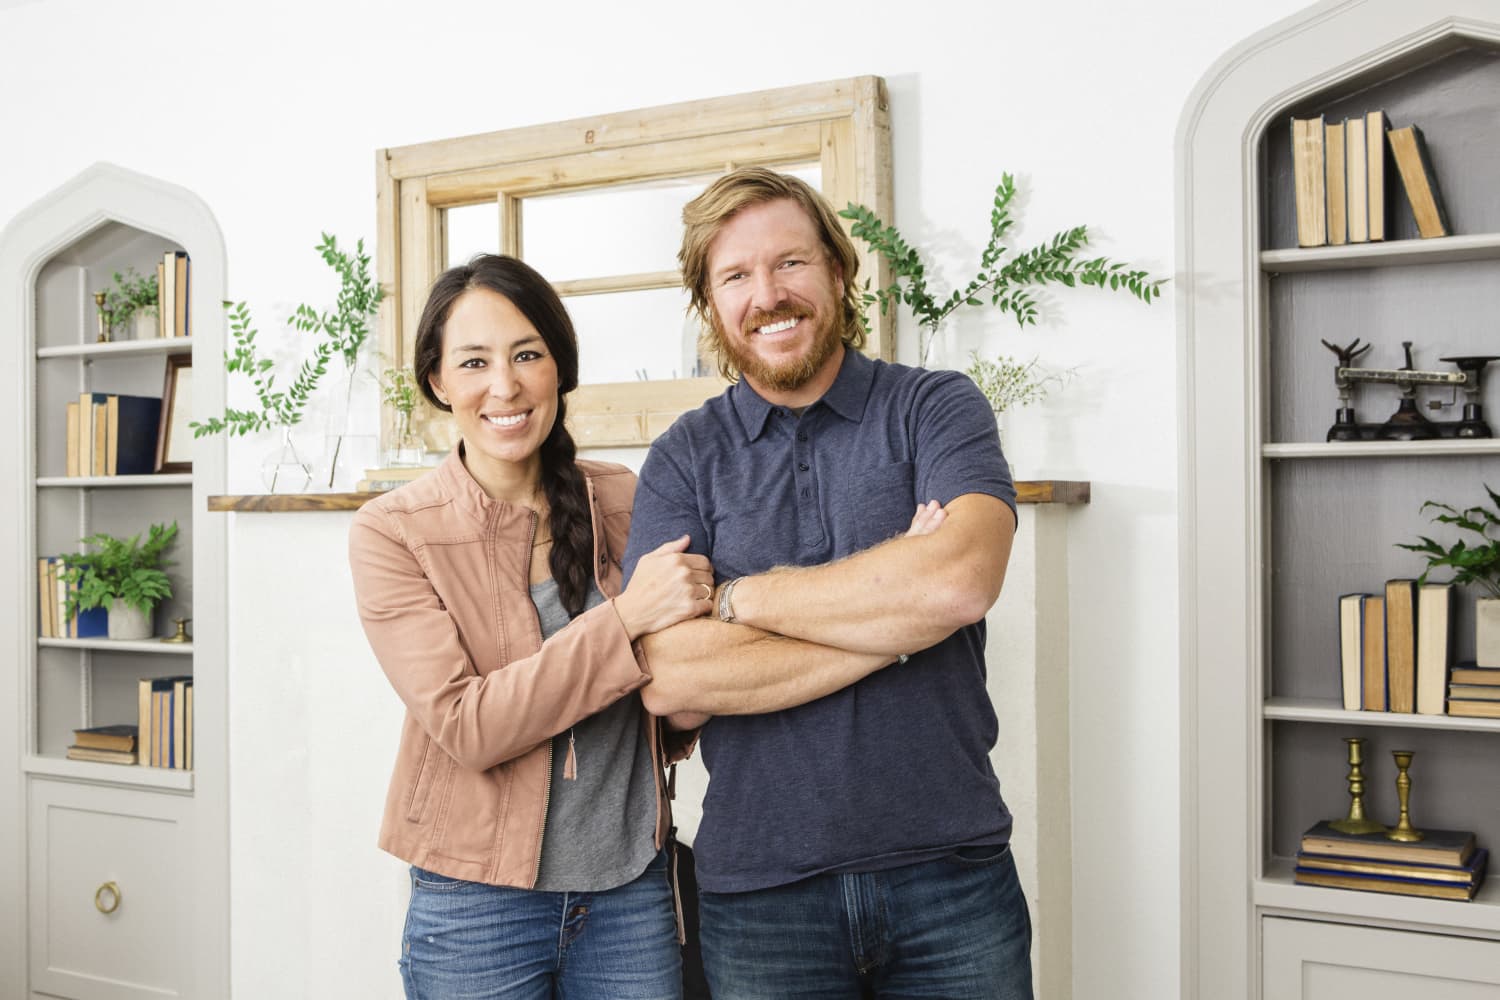 Chip and Joanna Gaines' Magnolia House Is for Sale